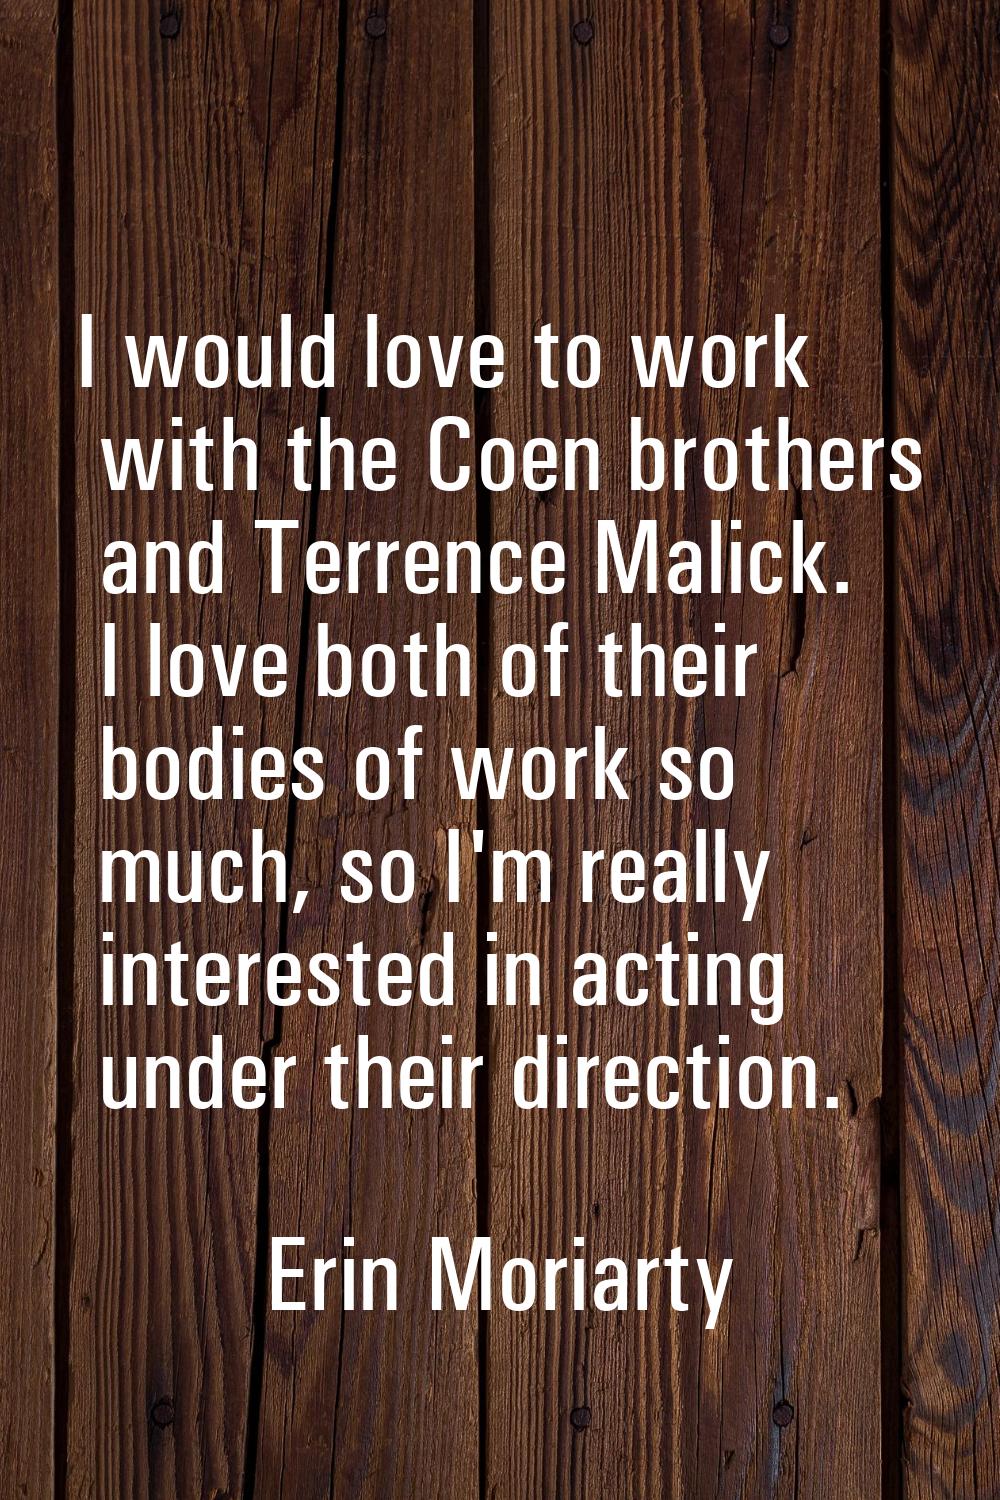 I would love to work with the Coen brothers and Terrence Malick. I love both of their bodies of wor